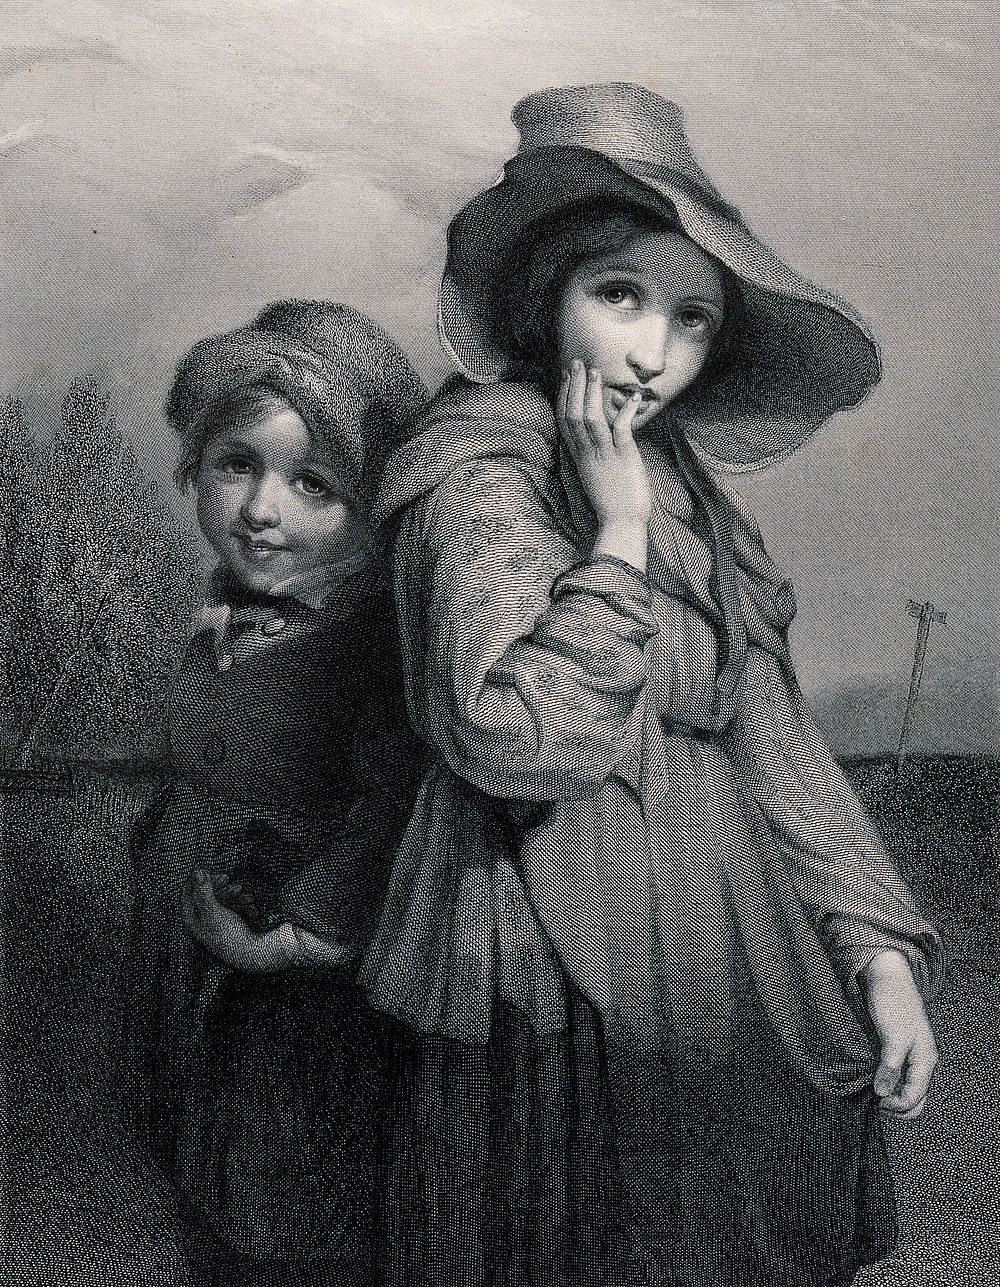 Two young children in ragged clothing learning to beg for money. Engraving by H. Bourne after R. Rothwell.